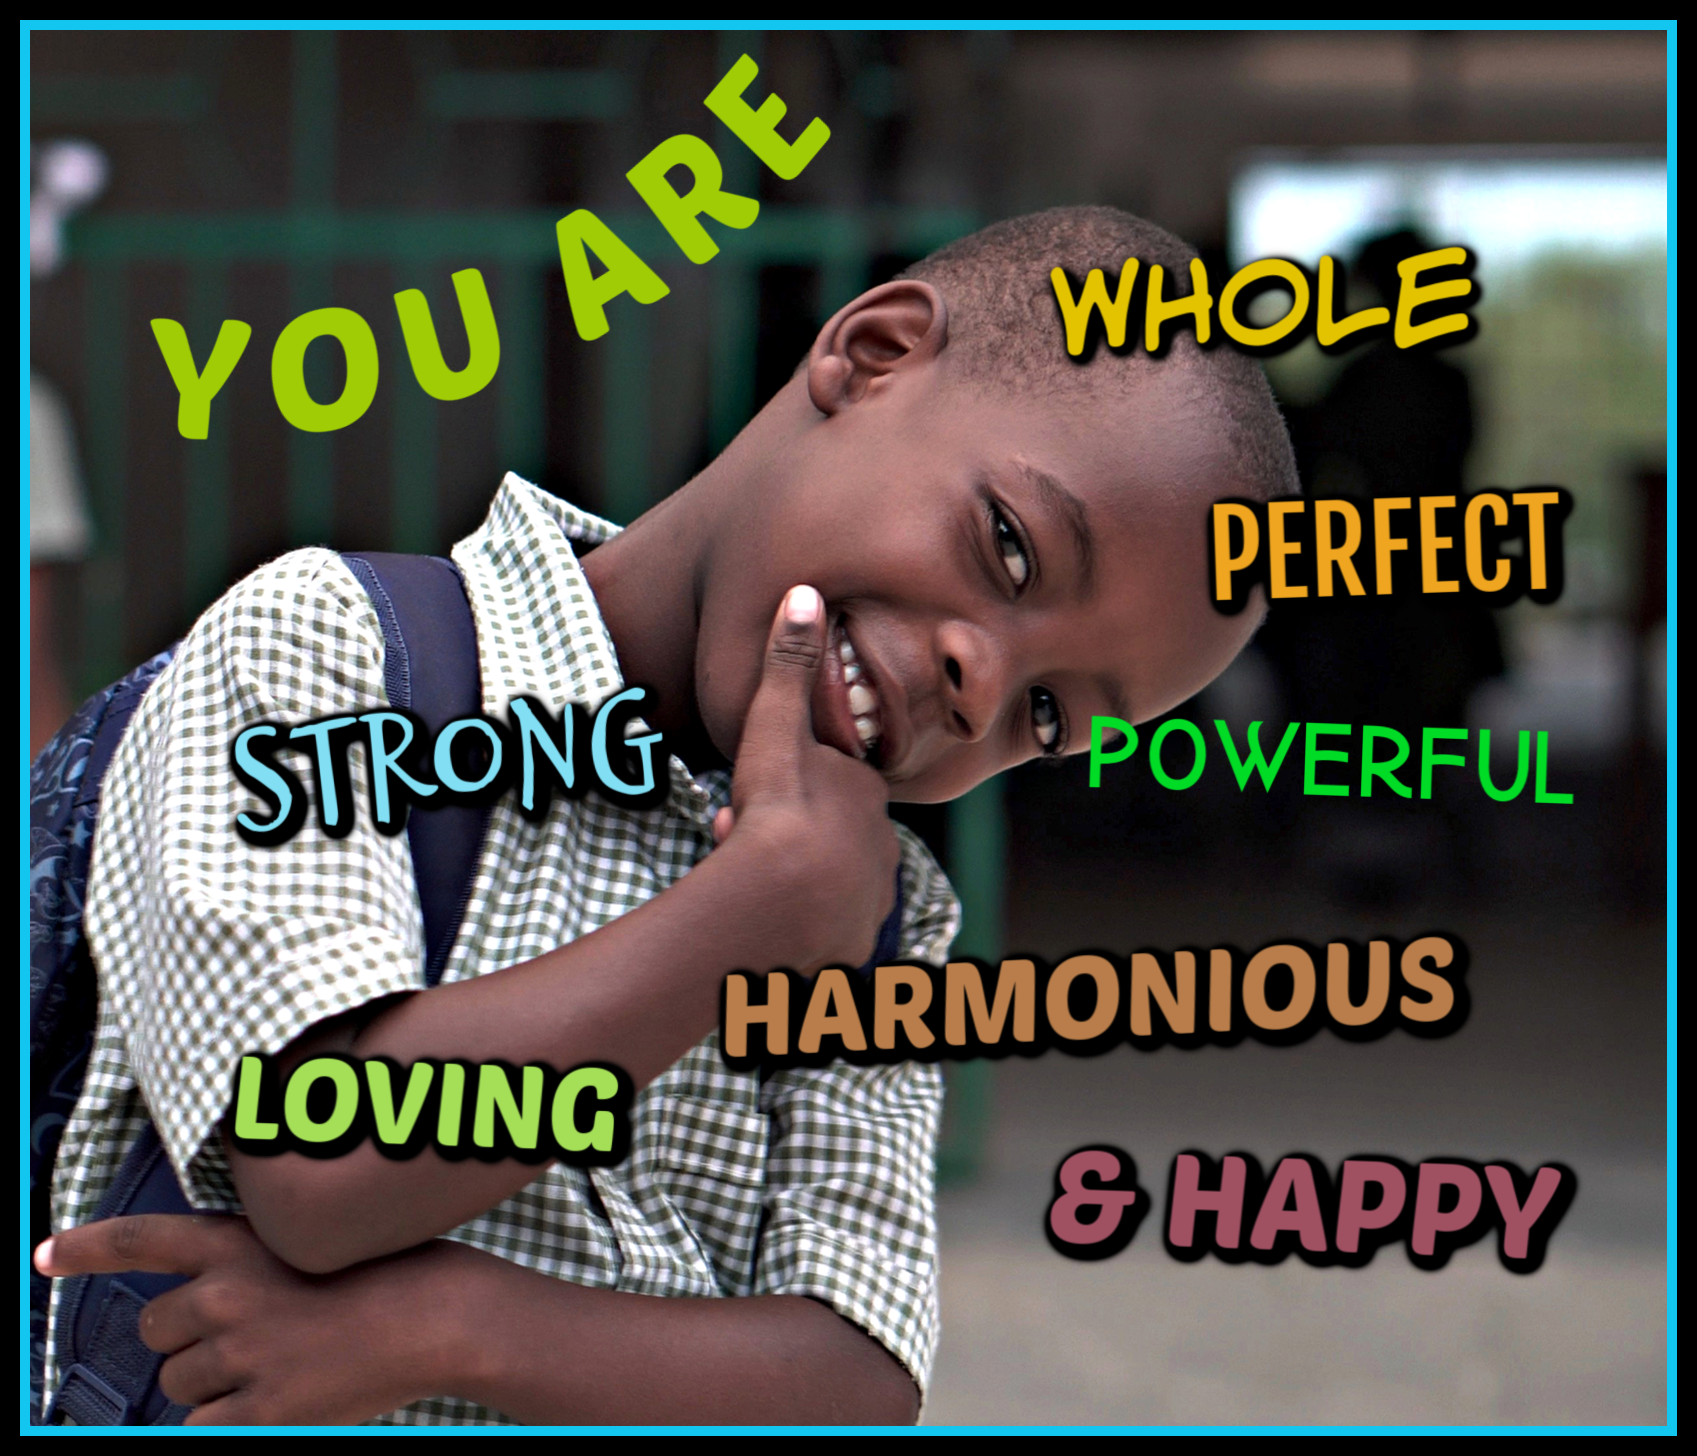 The perfect affirmation video."you are whole, perfect, strong, powerful, loving, harmonious, and happy". Affirm with the power ofIAm